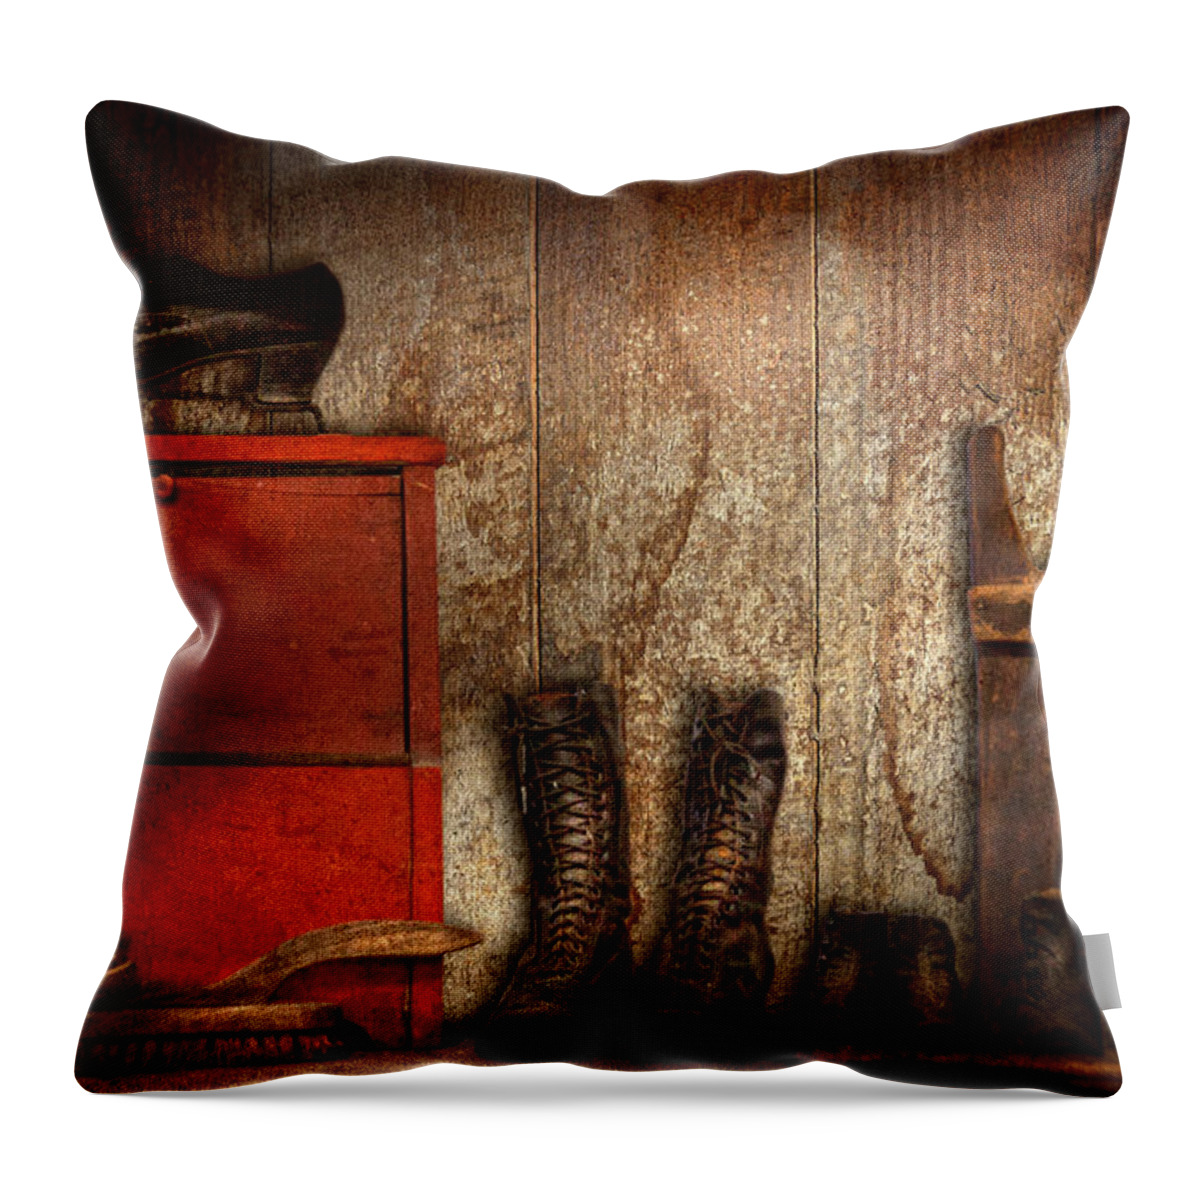 Cobbler Throw Pillow featuring the photograph Cobbler - The shoe shiner 1900 by Mike Savad